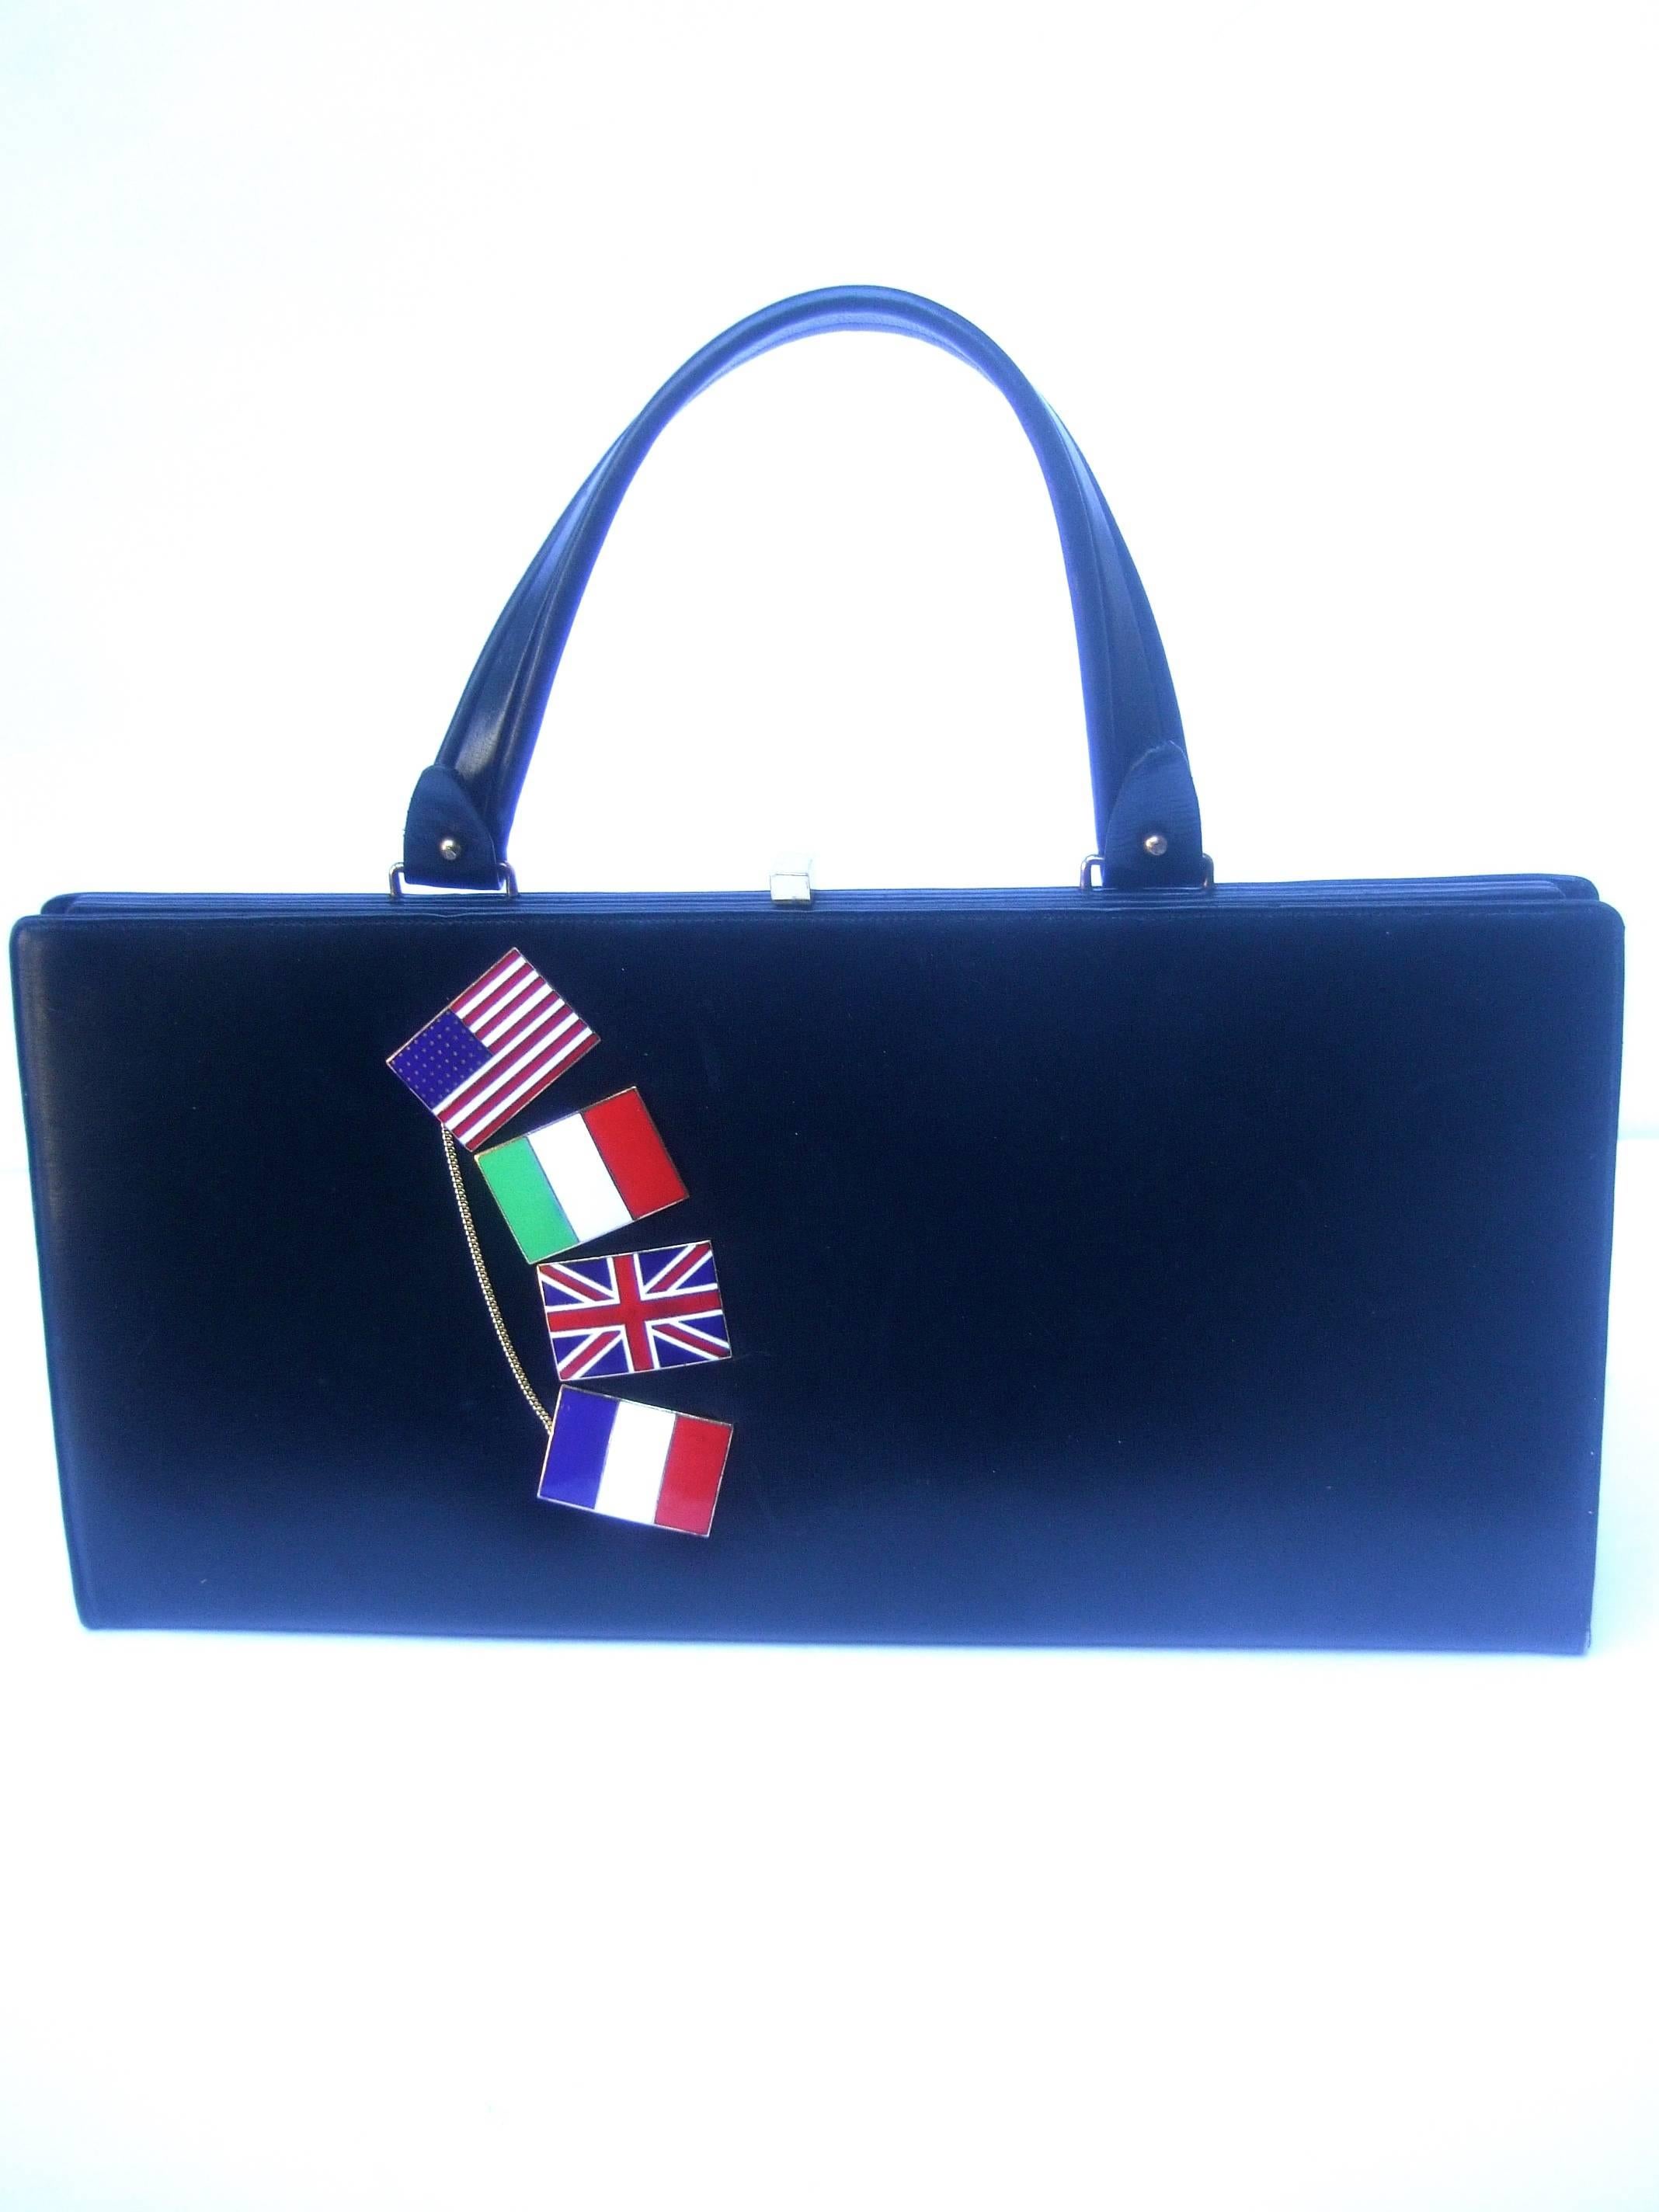 1960s Ebony leather cloisonné enamel flag theme handbag 
The stylish retro handbag is adorned with four enamel flags
The collection of flags represent the US, Italy, Great Britain 
and France 

The collection of cloisonné enamel flags are accented